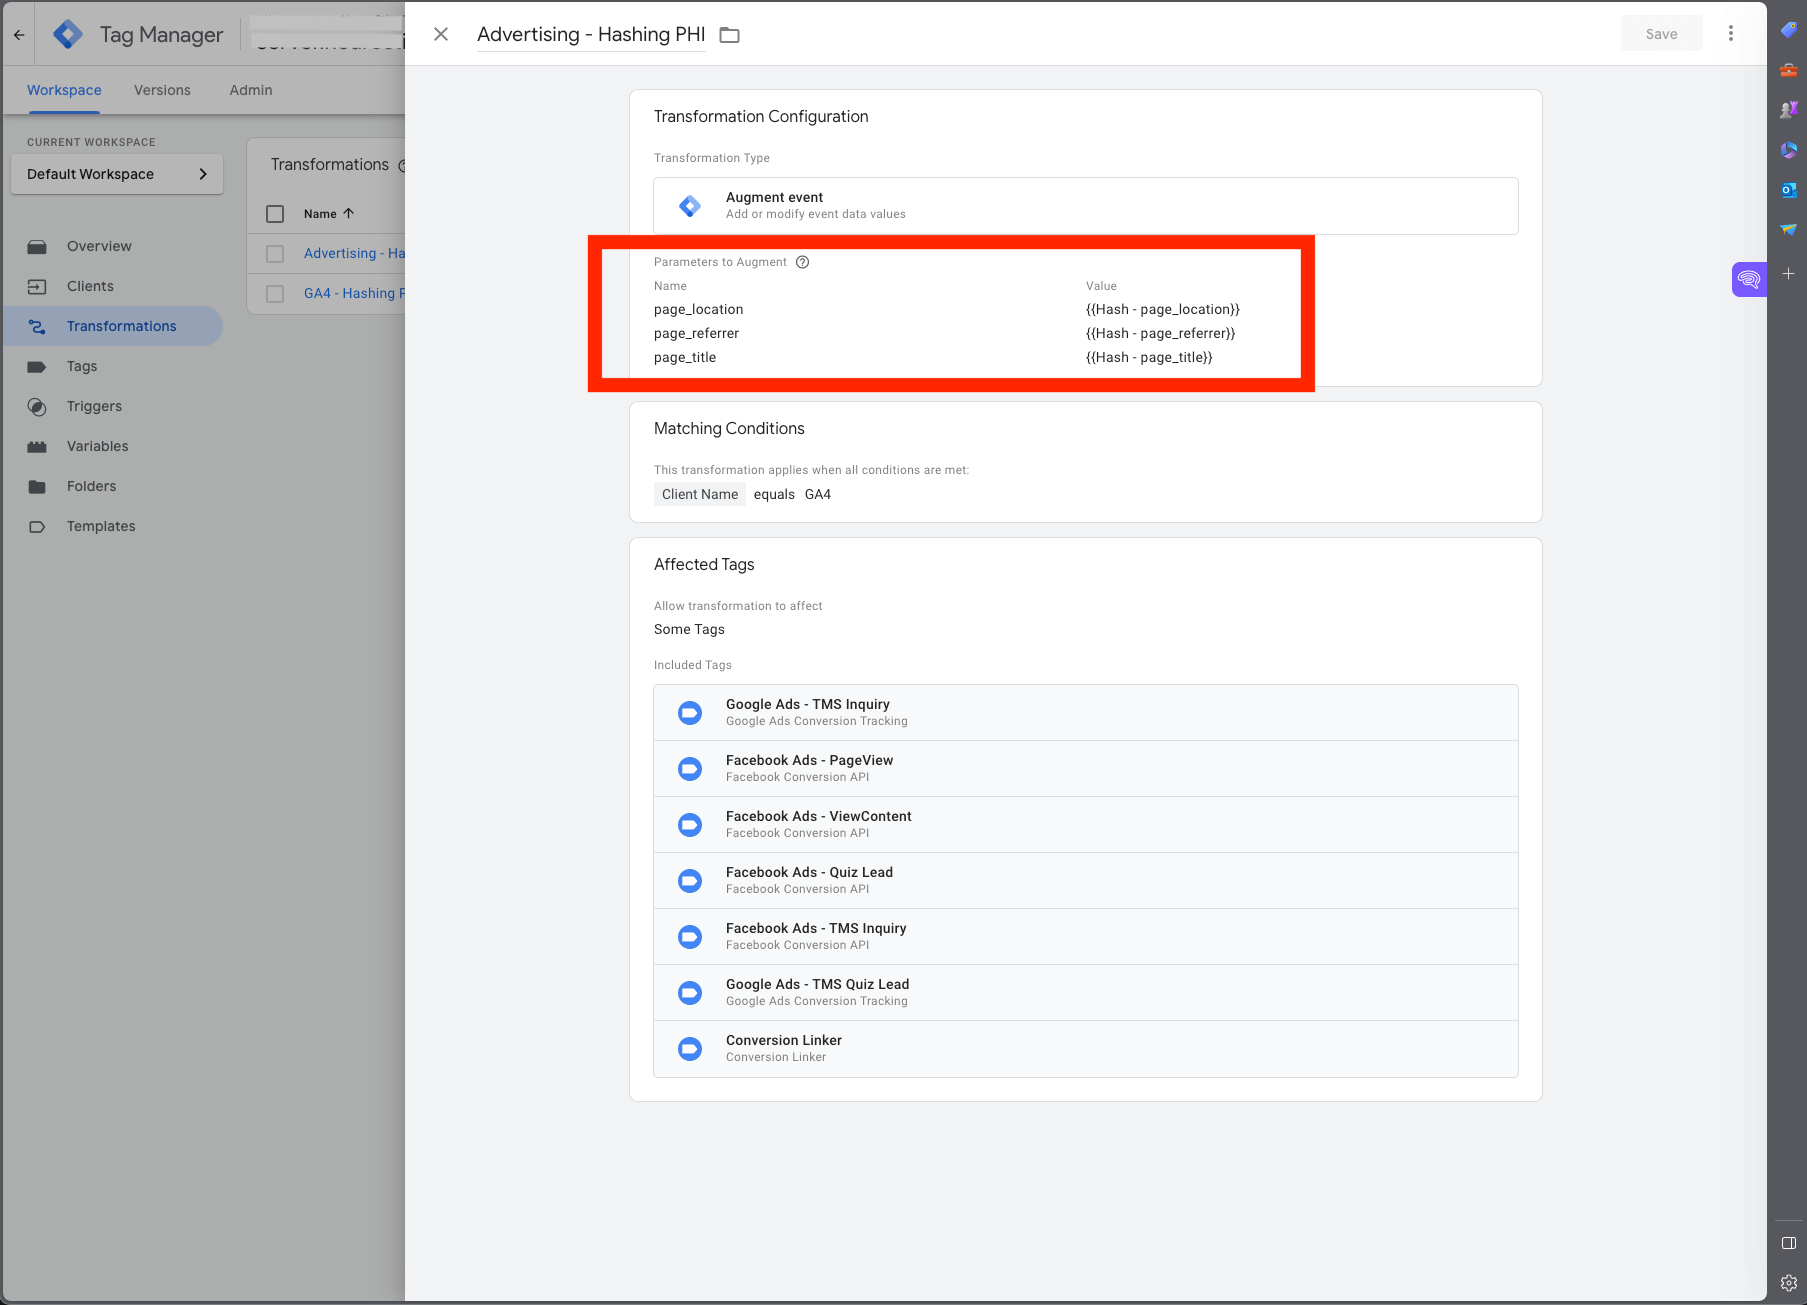 Screenshot of Google Tag Manager showing the augmented event transformation for HIPAA-compliant advertising.